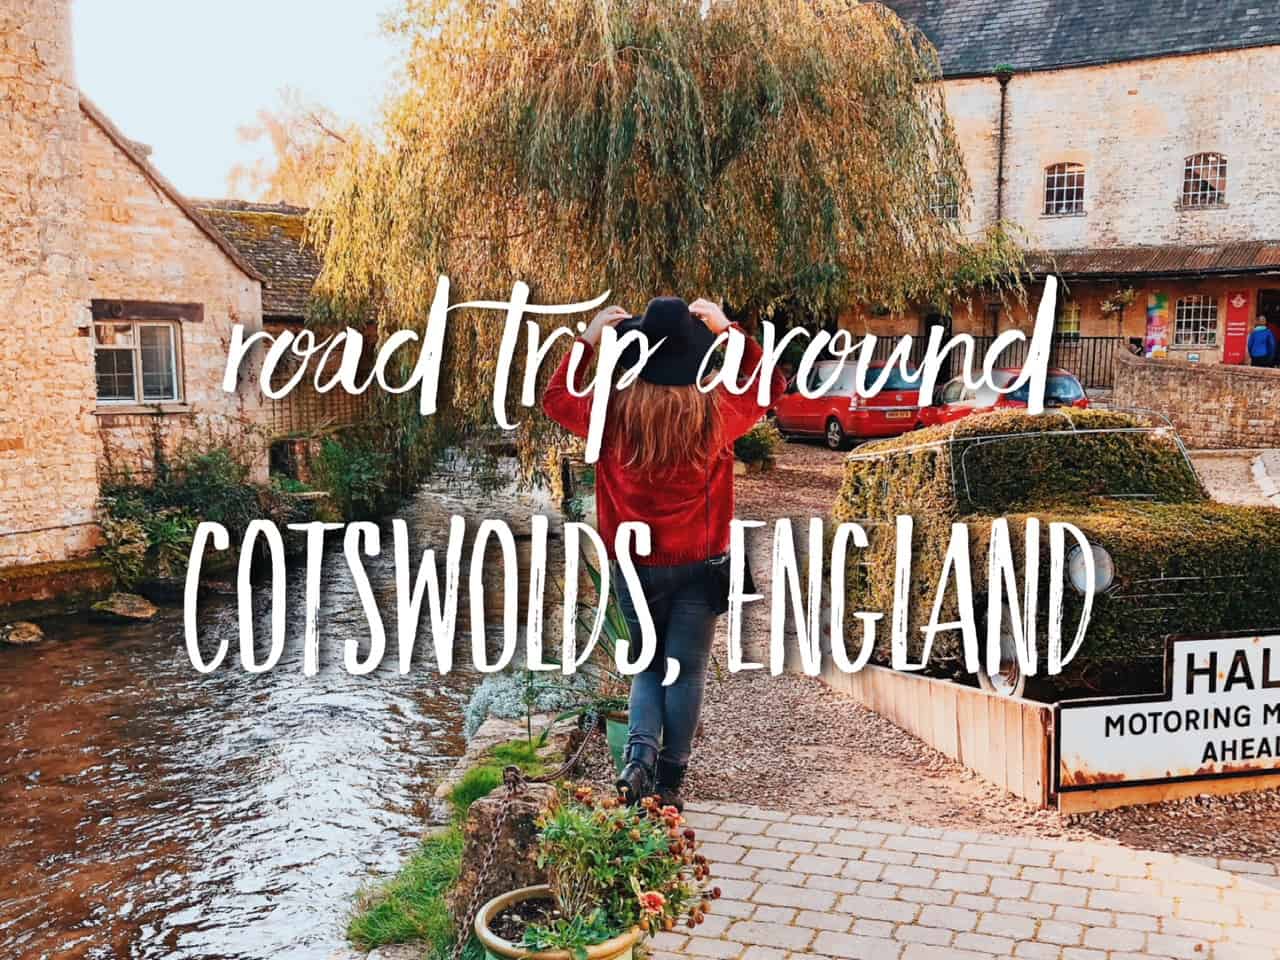 What to see in Cotswolds, England? 1-day Cotswolds itinerary